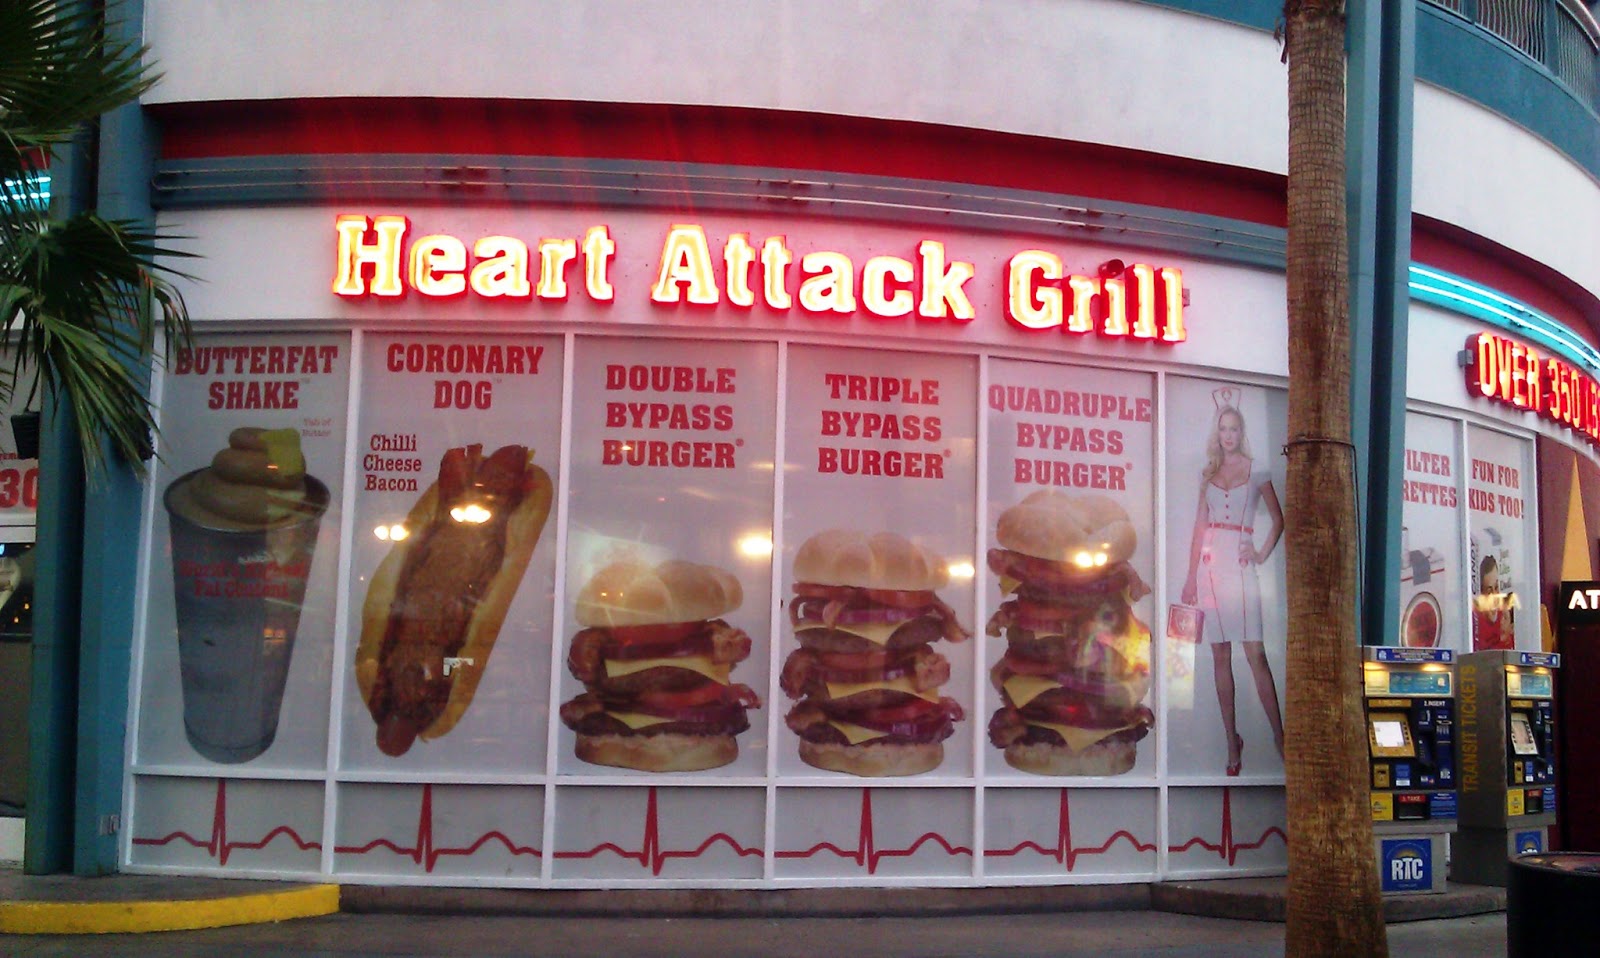 Honest and Accurate Burger Reviews by TheBurgerBusters: Heart Attack Vegas, NV